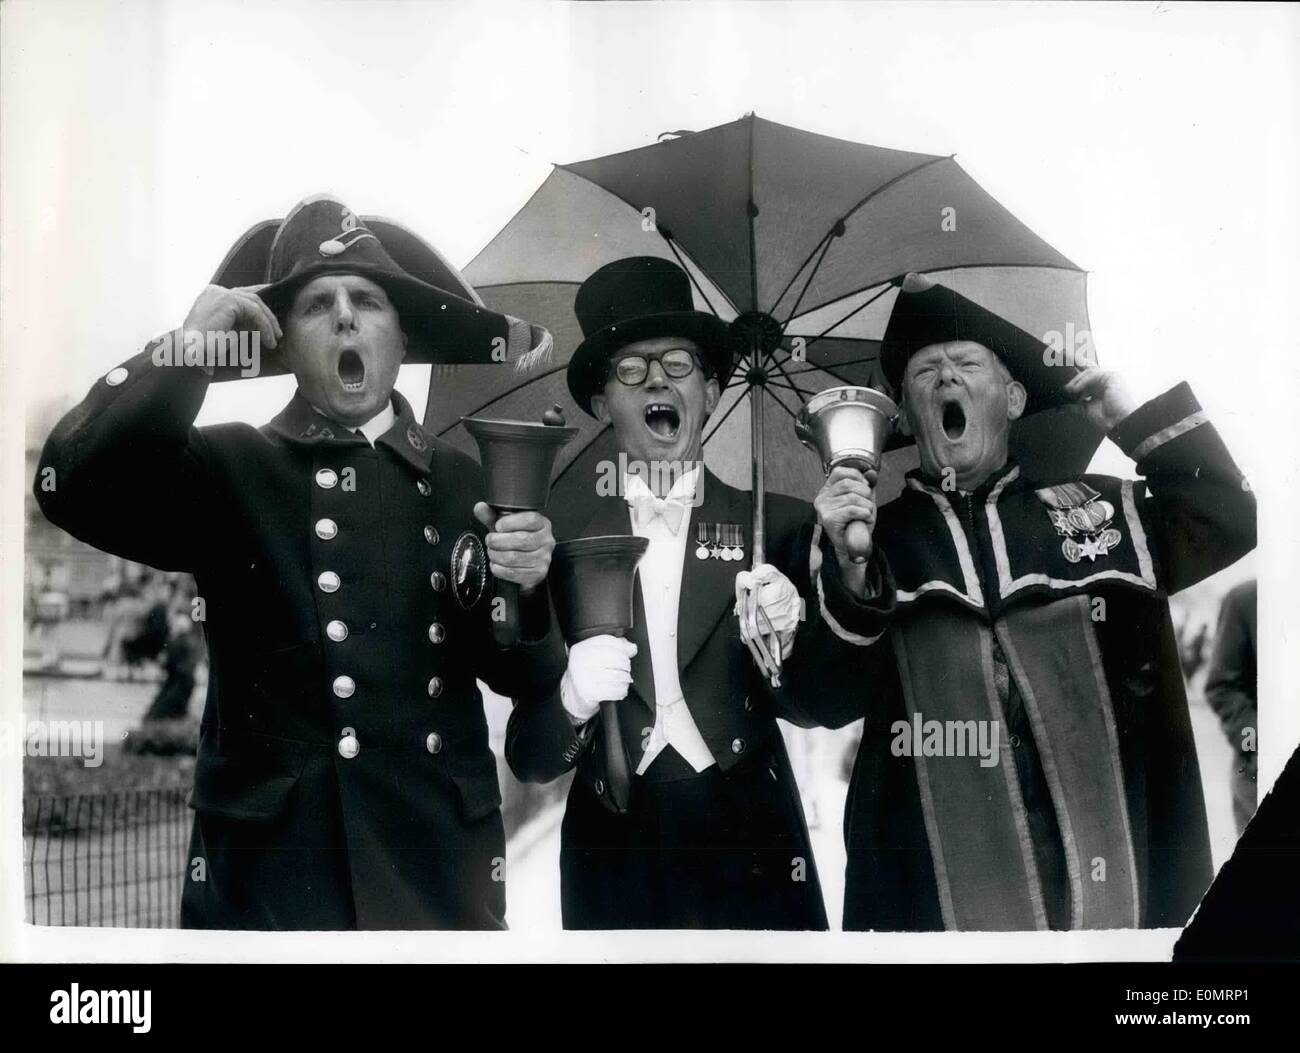 Aug. 08, 1956 - National Town criers championship: The ''news of the world'' National town criers' championship, took place today at Hastings. Keystone photo shows Three of the competitors shelter under an umbrella at Hastings today. (L to R) John Davies, Town crier of wells, somerset: Alfred Howard, of sundown, shanklin, Isle of wight, and Beriie Maunder, of callington, Cornwall. Stock Photo